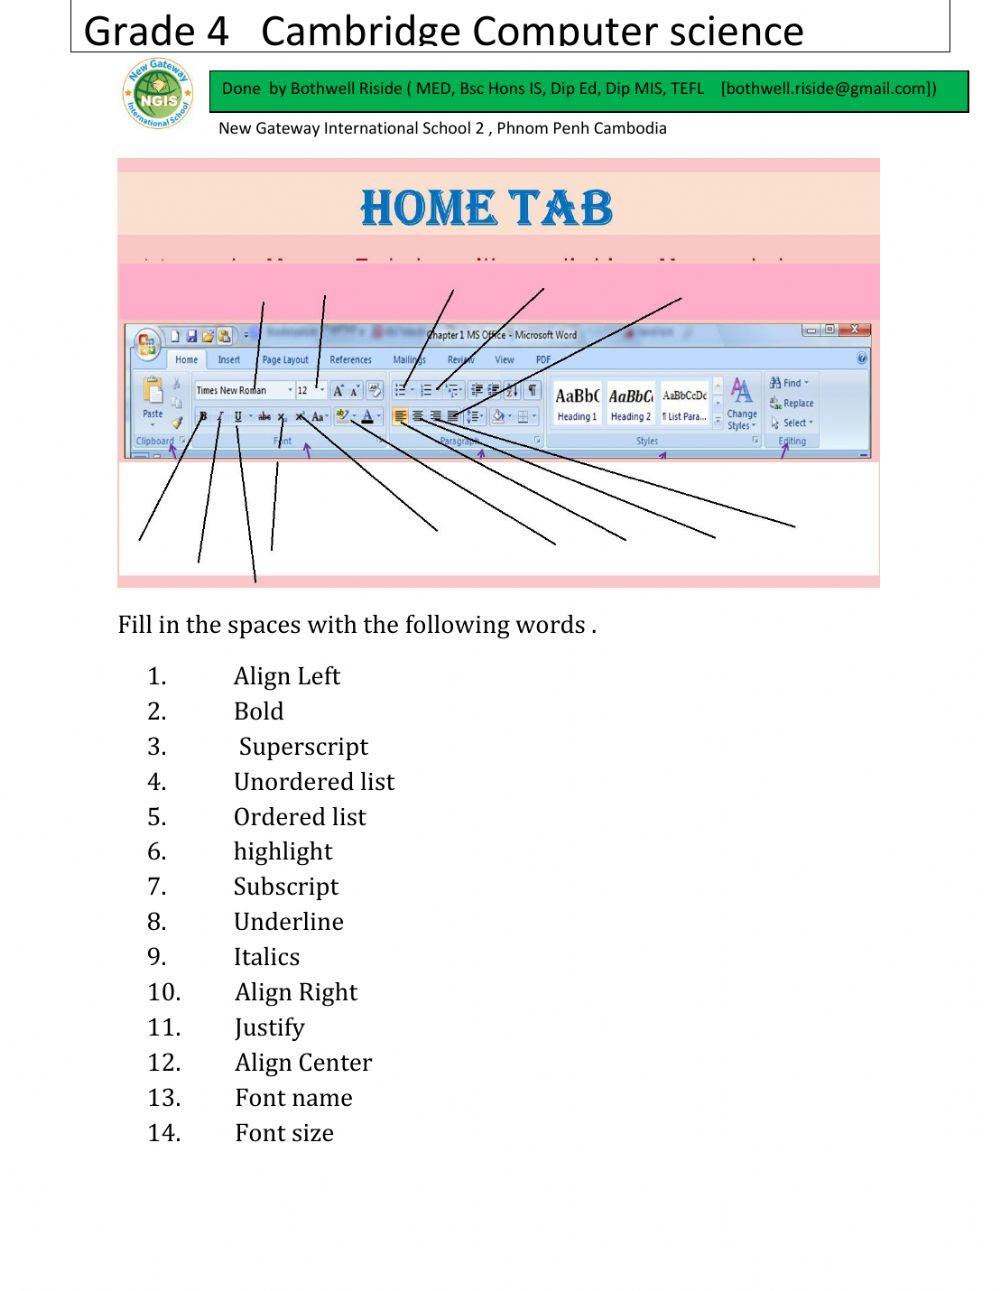 Grade 4 ICT Ms Word by Bothwell Riside